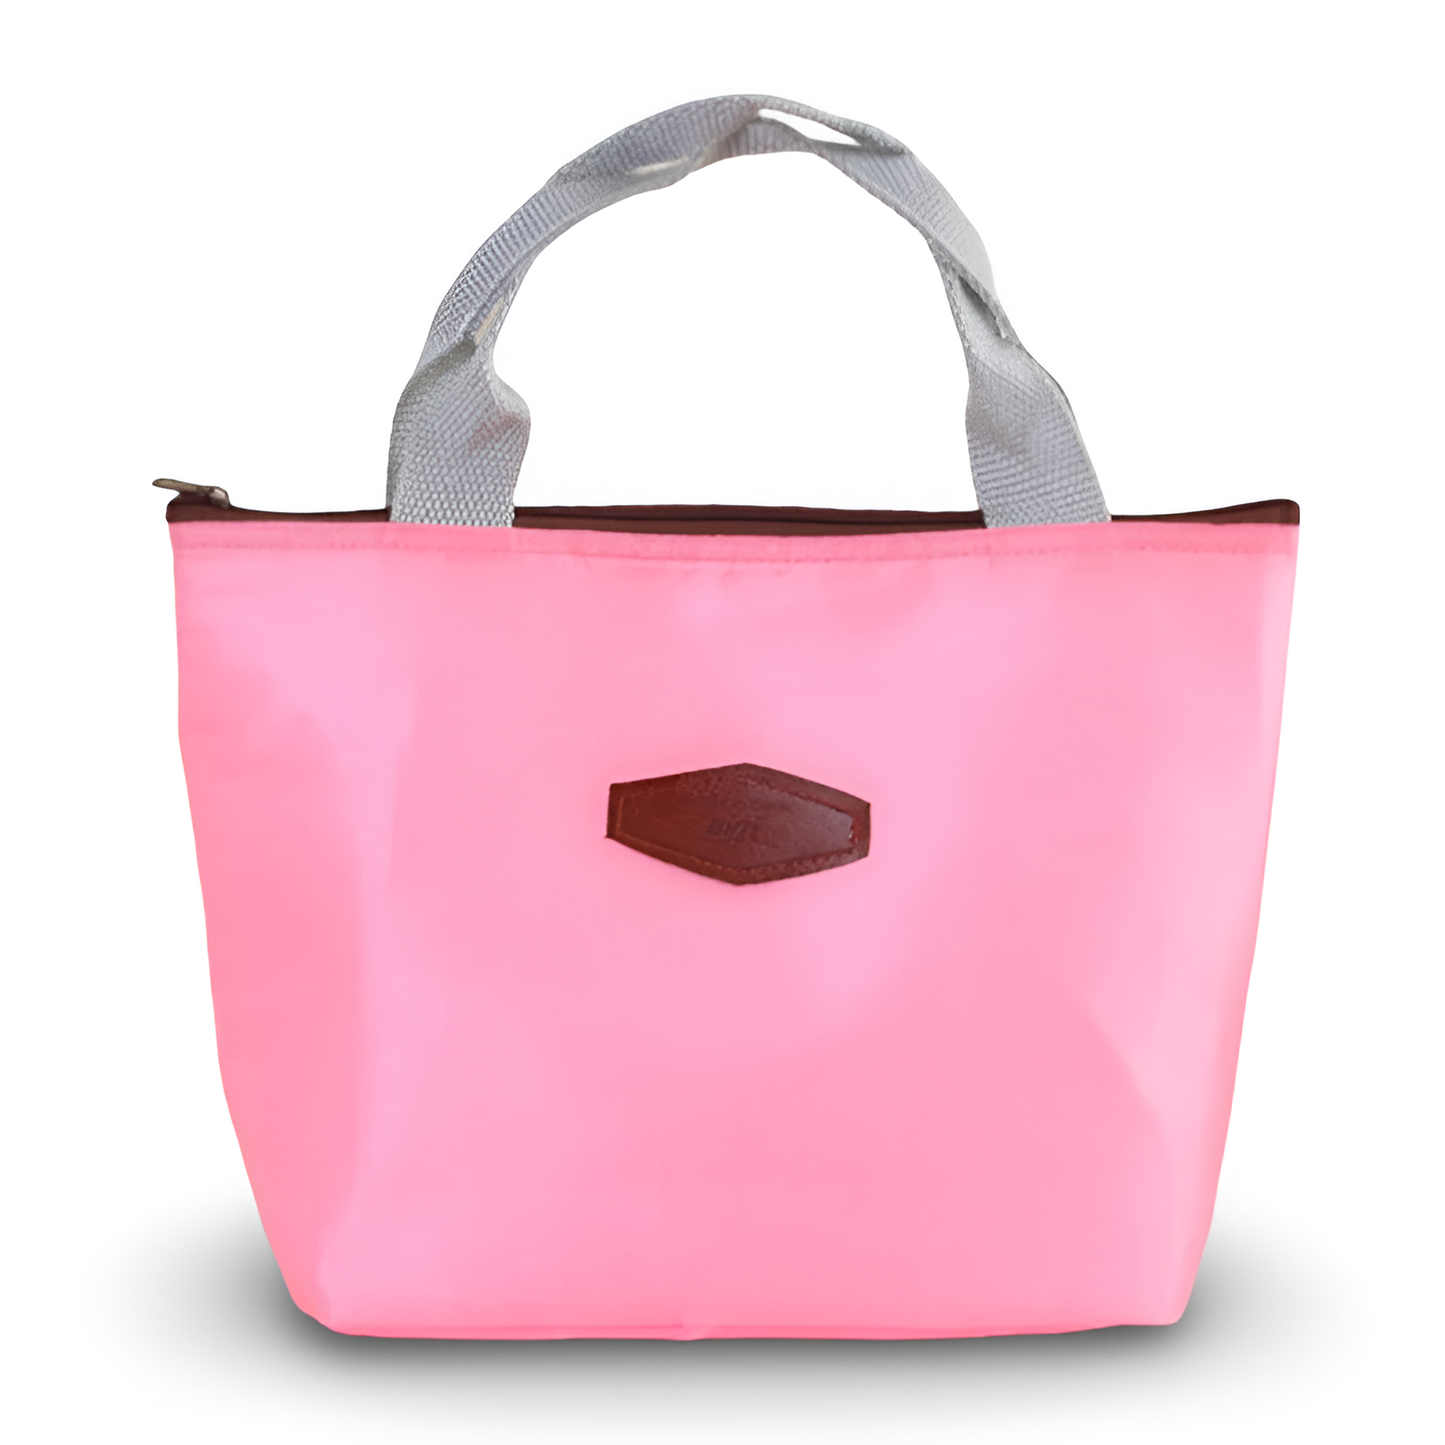 Sac Repas Isotherme Femme : Multicolore Rose